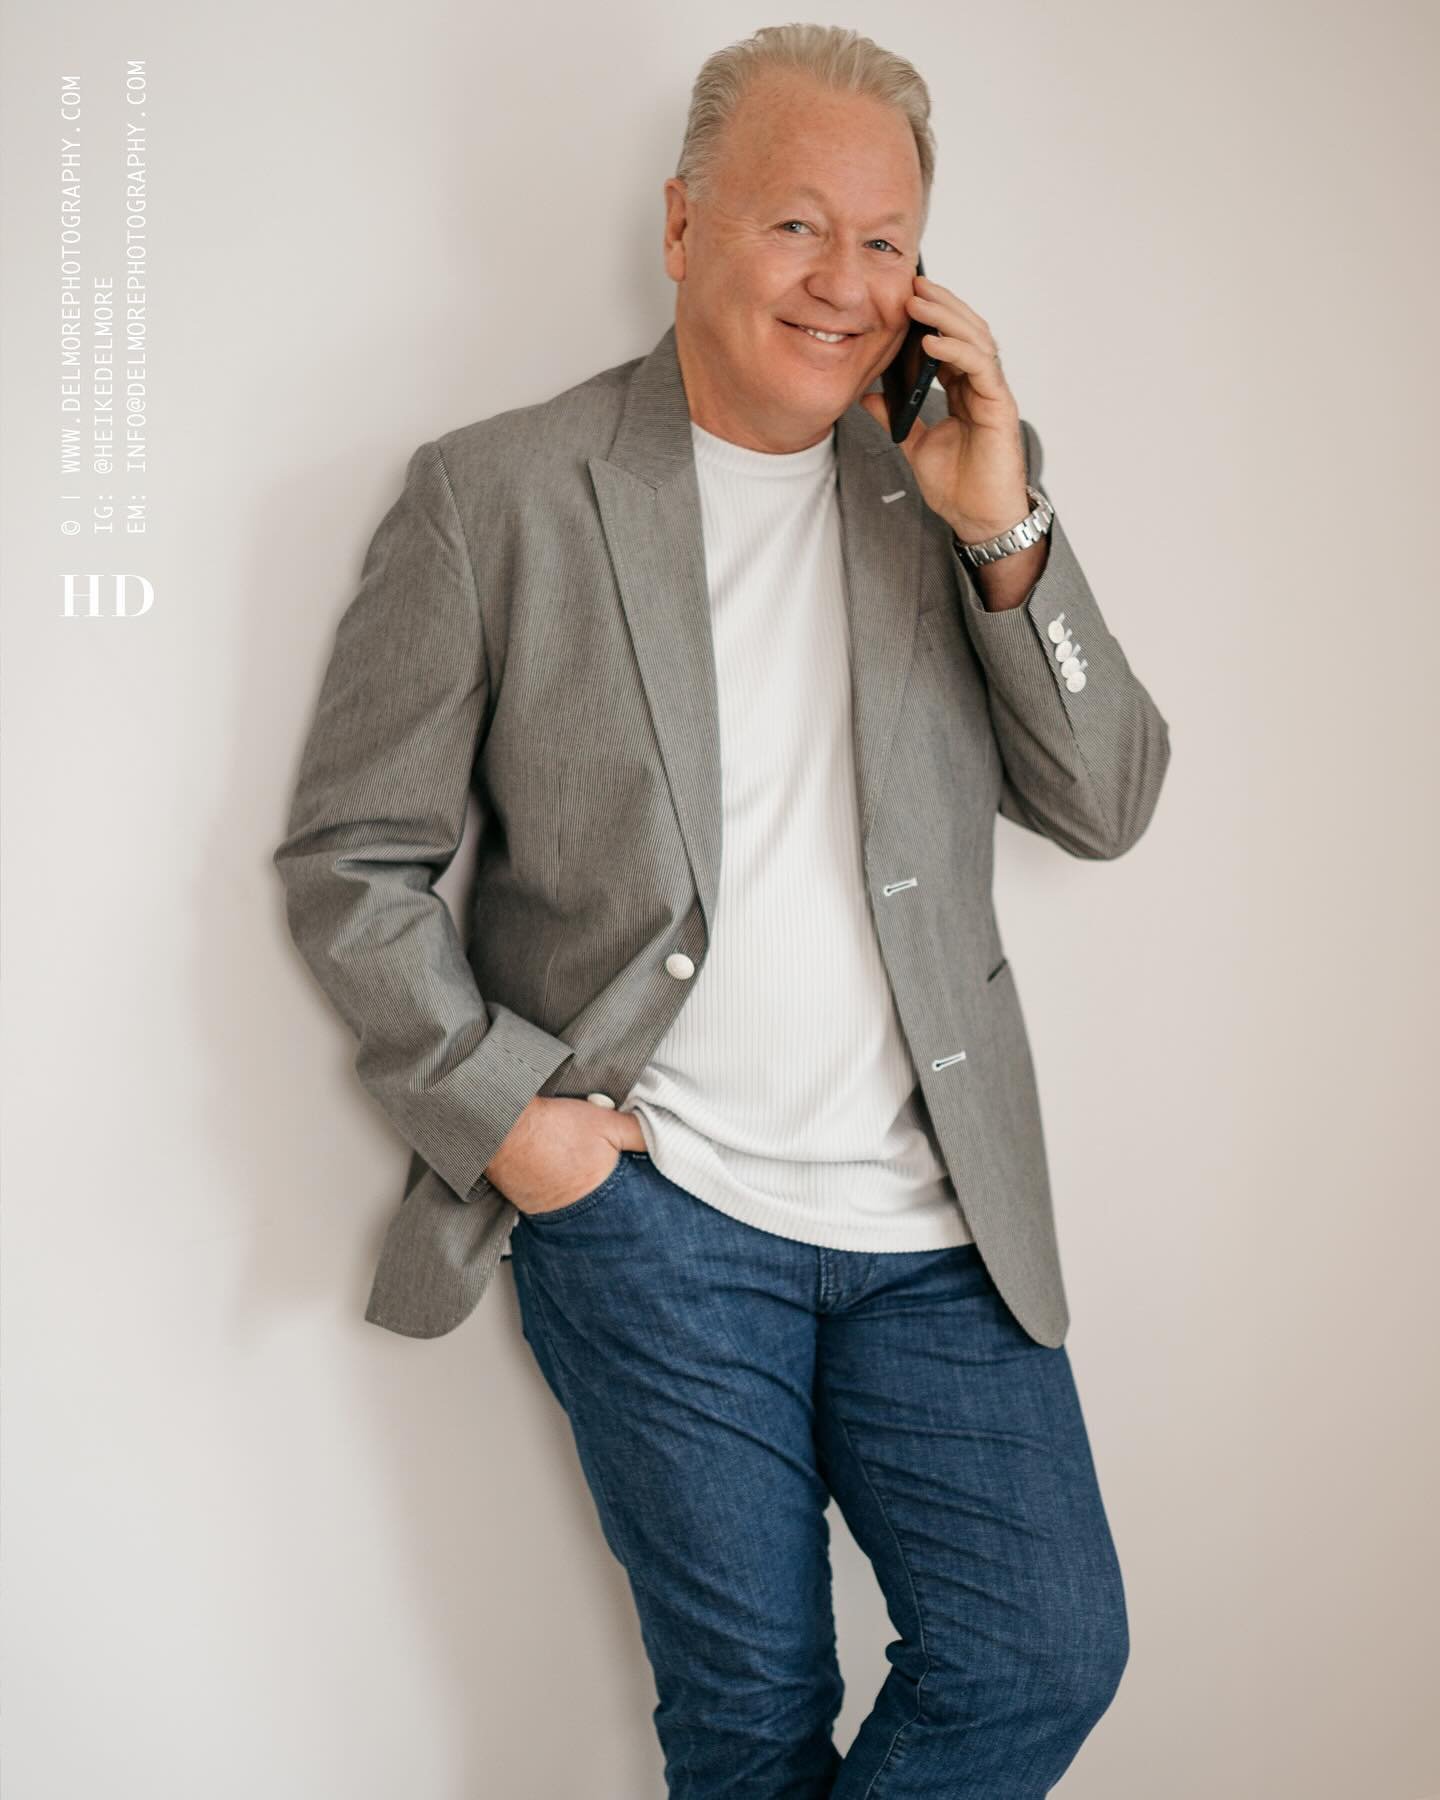 New branding photos are here! Meet Bill, @billkehn the friendly face behind Bill Kehn Realty Group. His mission? Making your waterfront property dreams in Ontario, Canada &amp; Florida a reality. Bill and his legal team make cross-border property tra